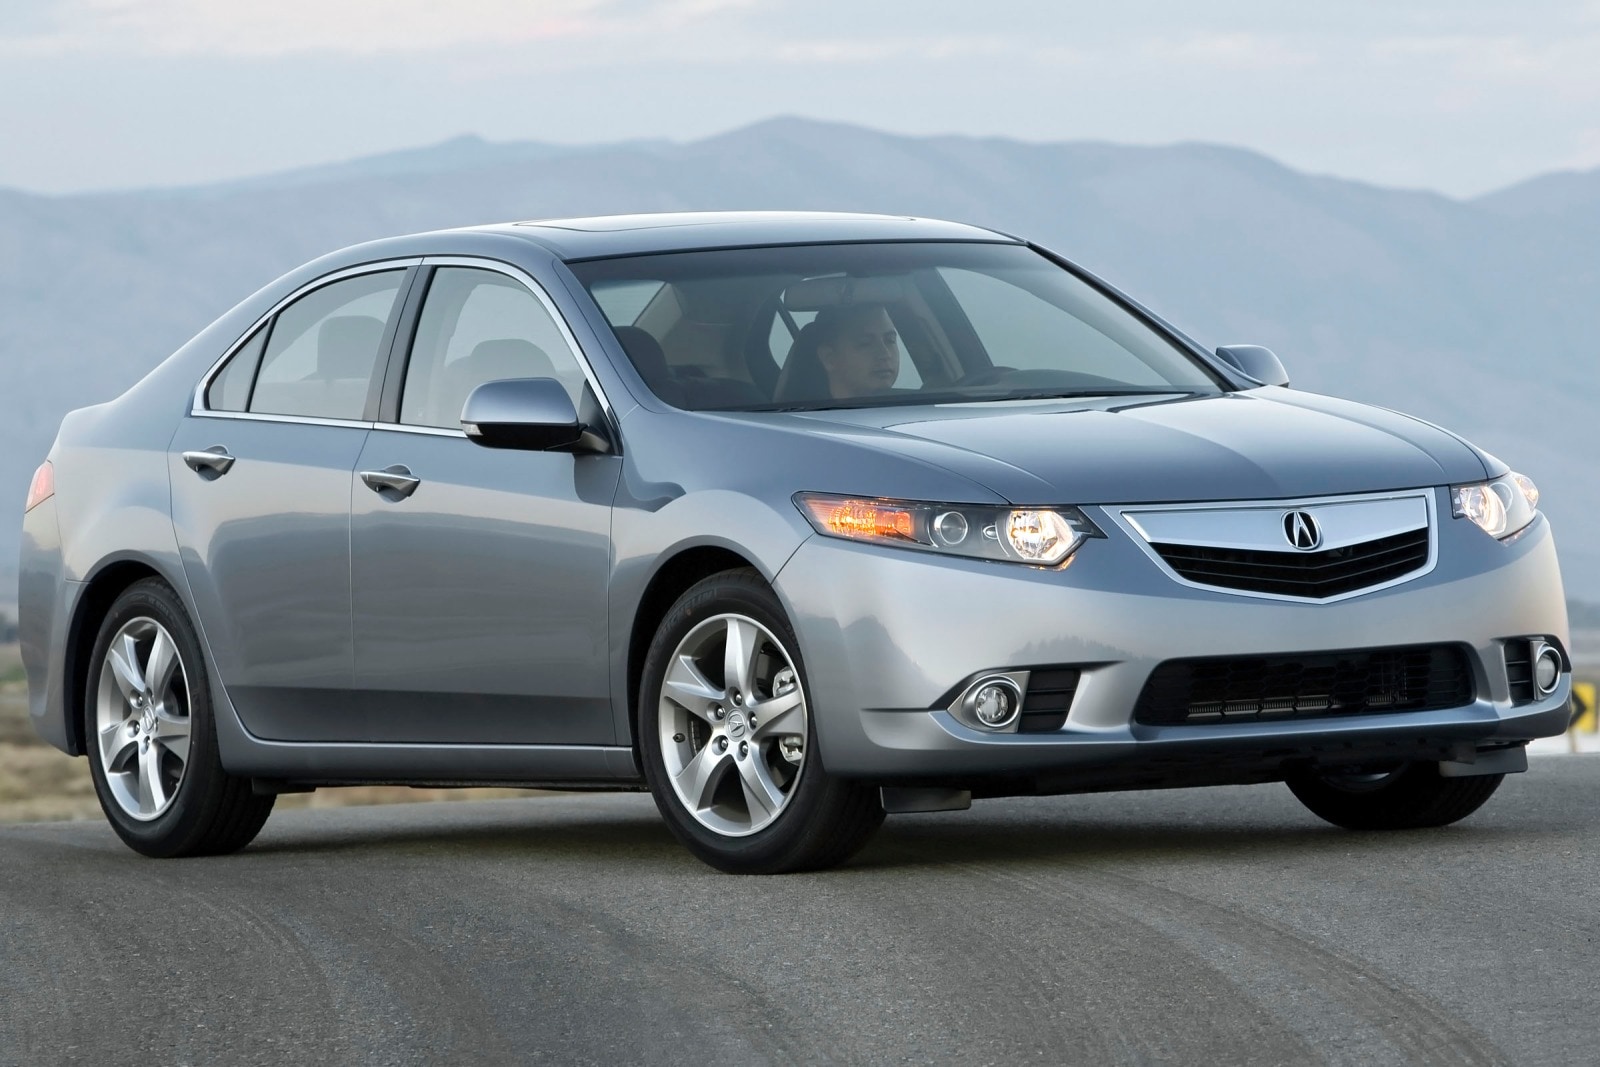 2012 Acura TSX Review & Ratings | Edmunds